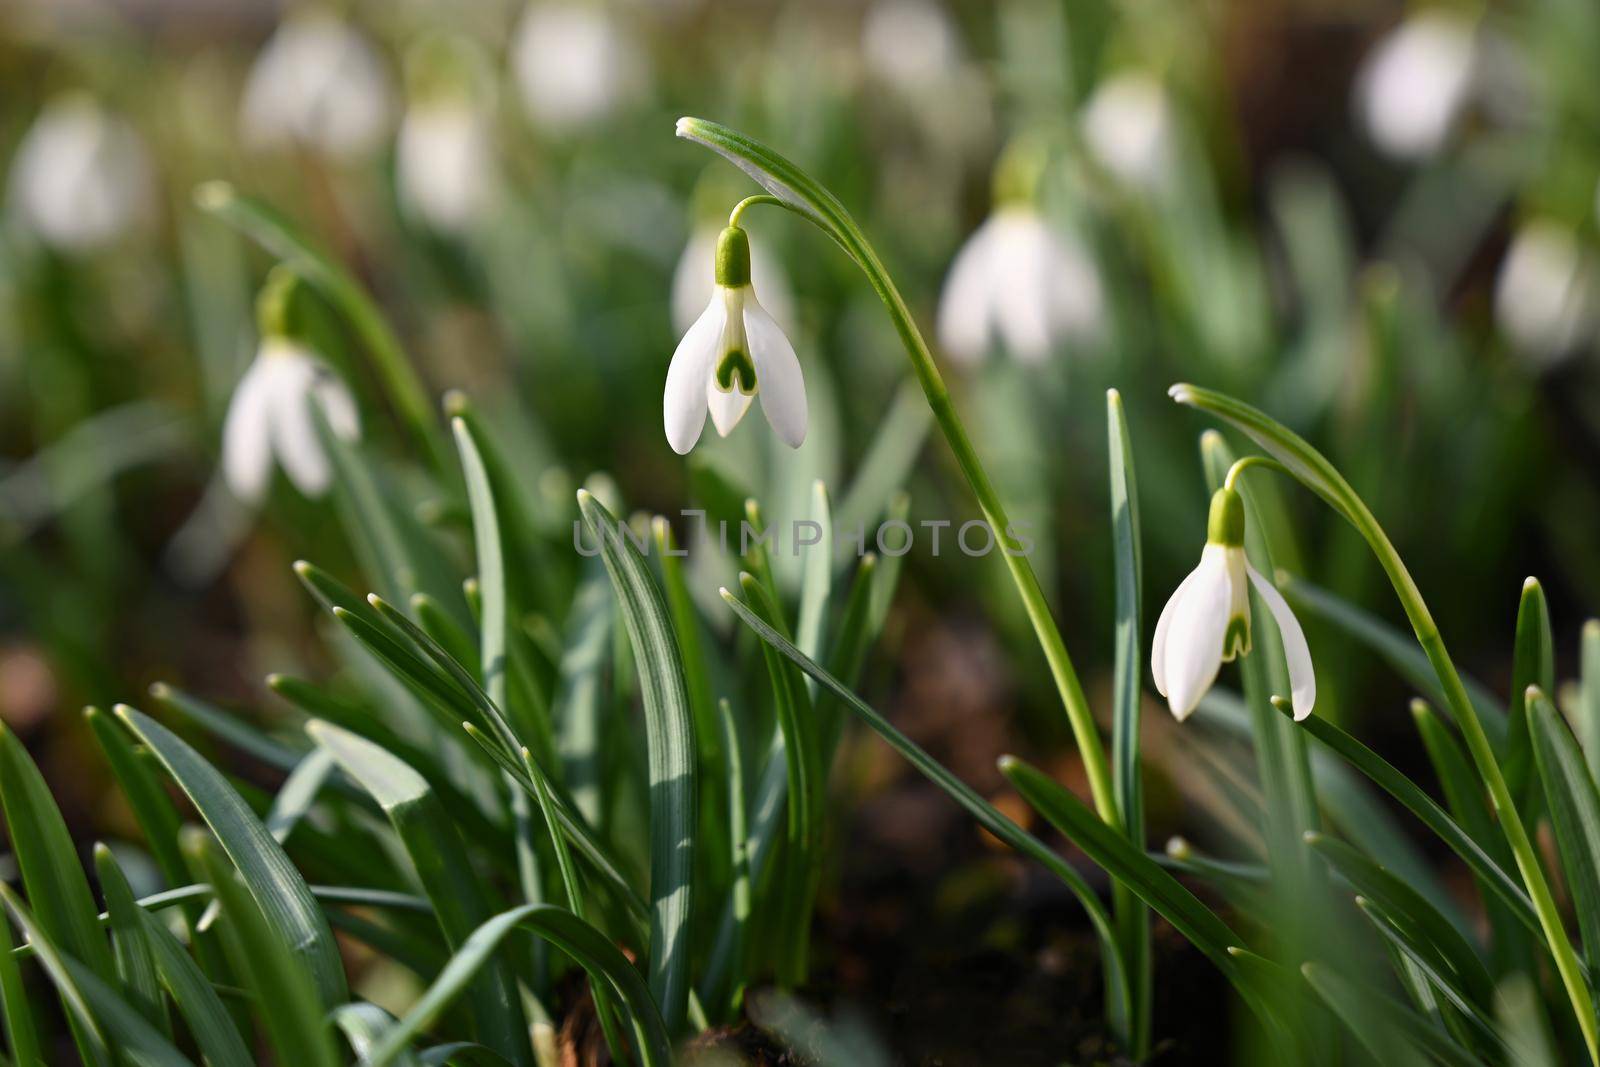 Spring flowers. The first flowering white plants in spring. Natural colorful background. (Galanthus nivalis) by Montypeter